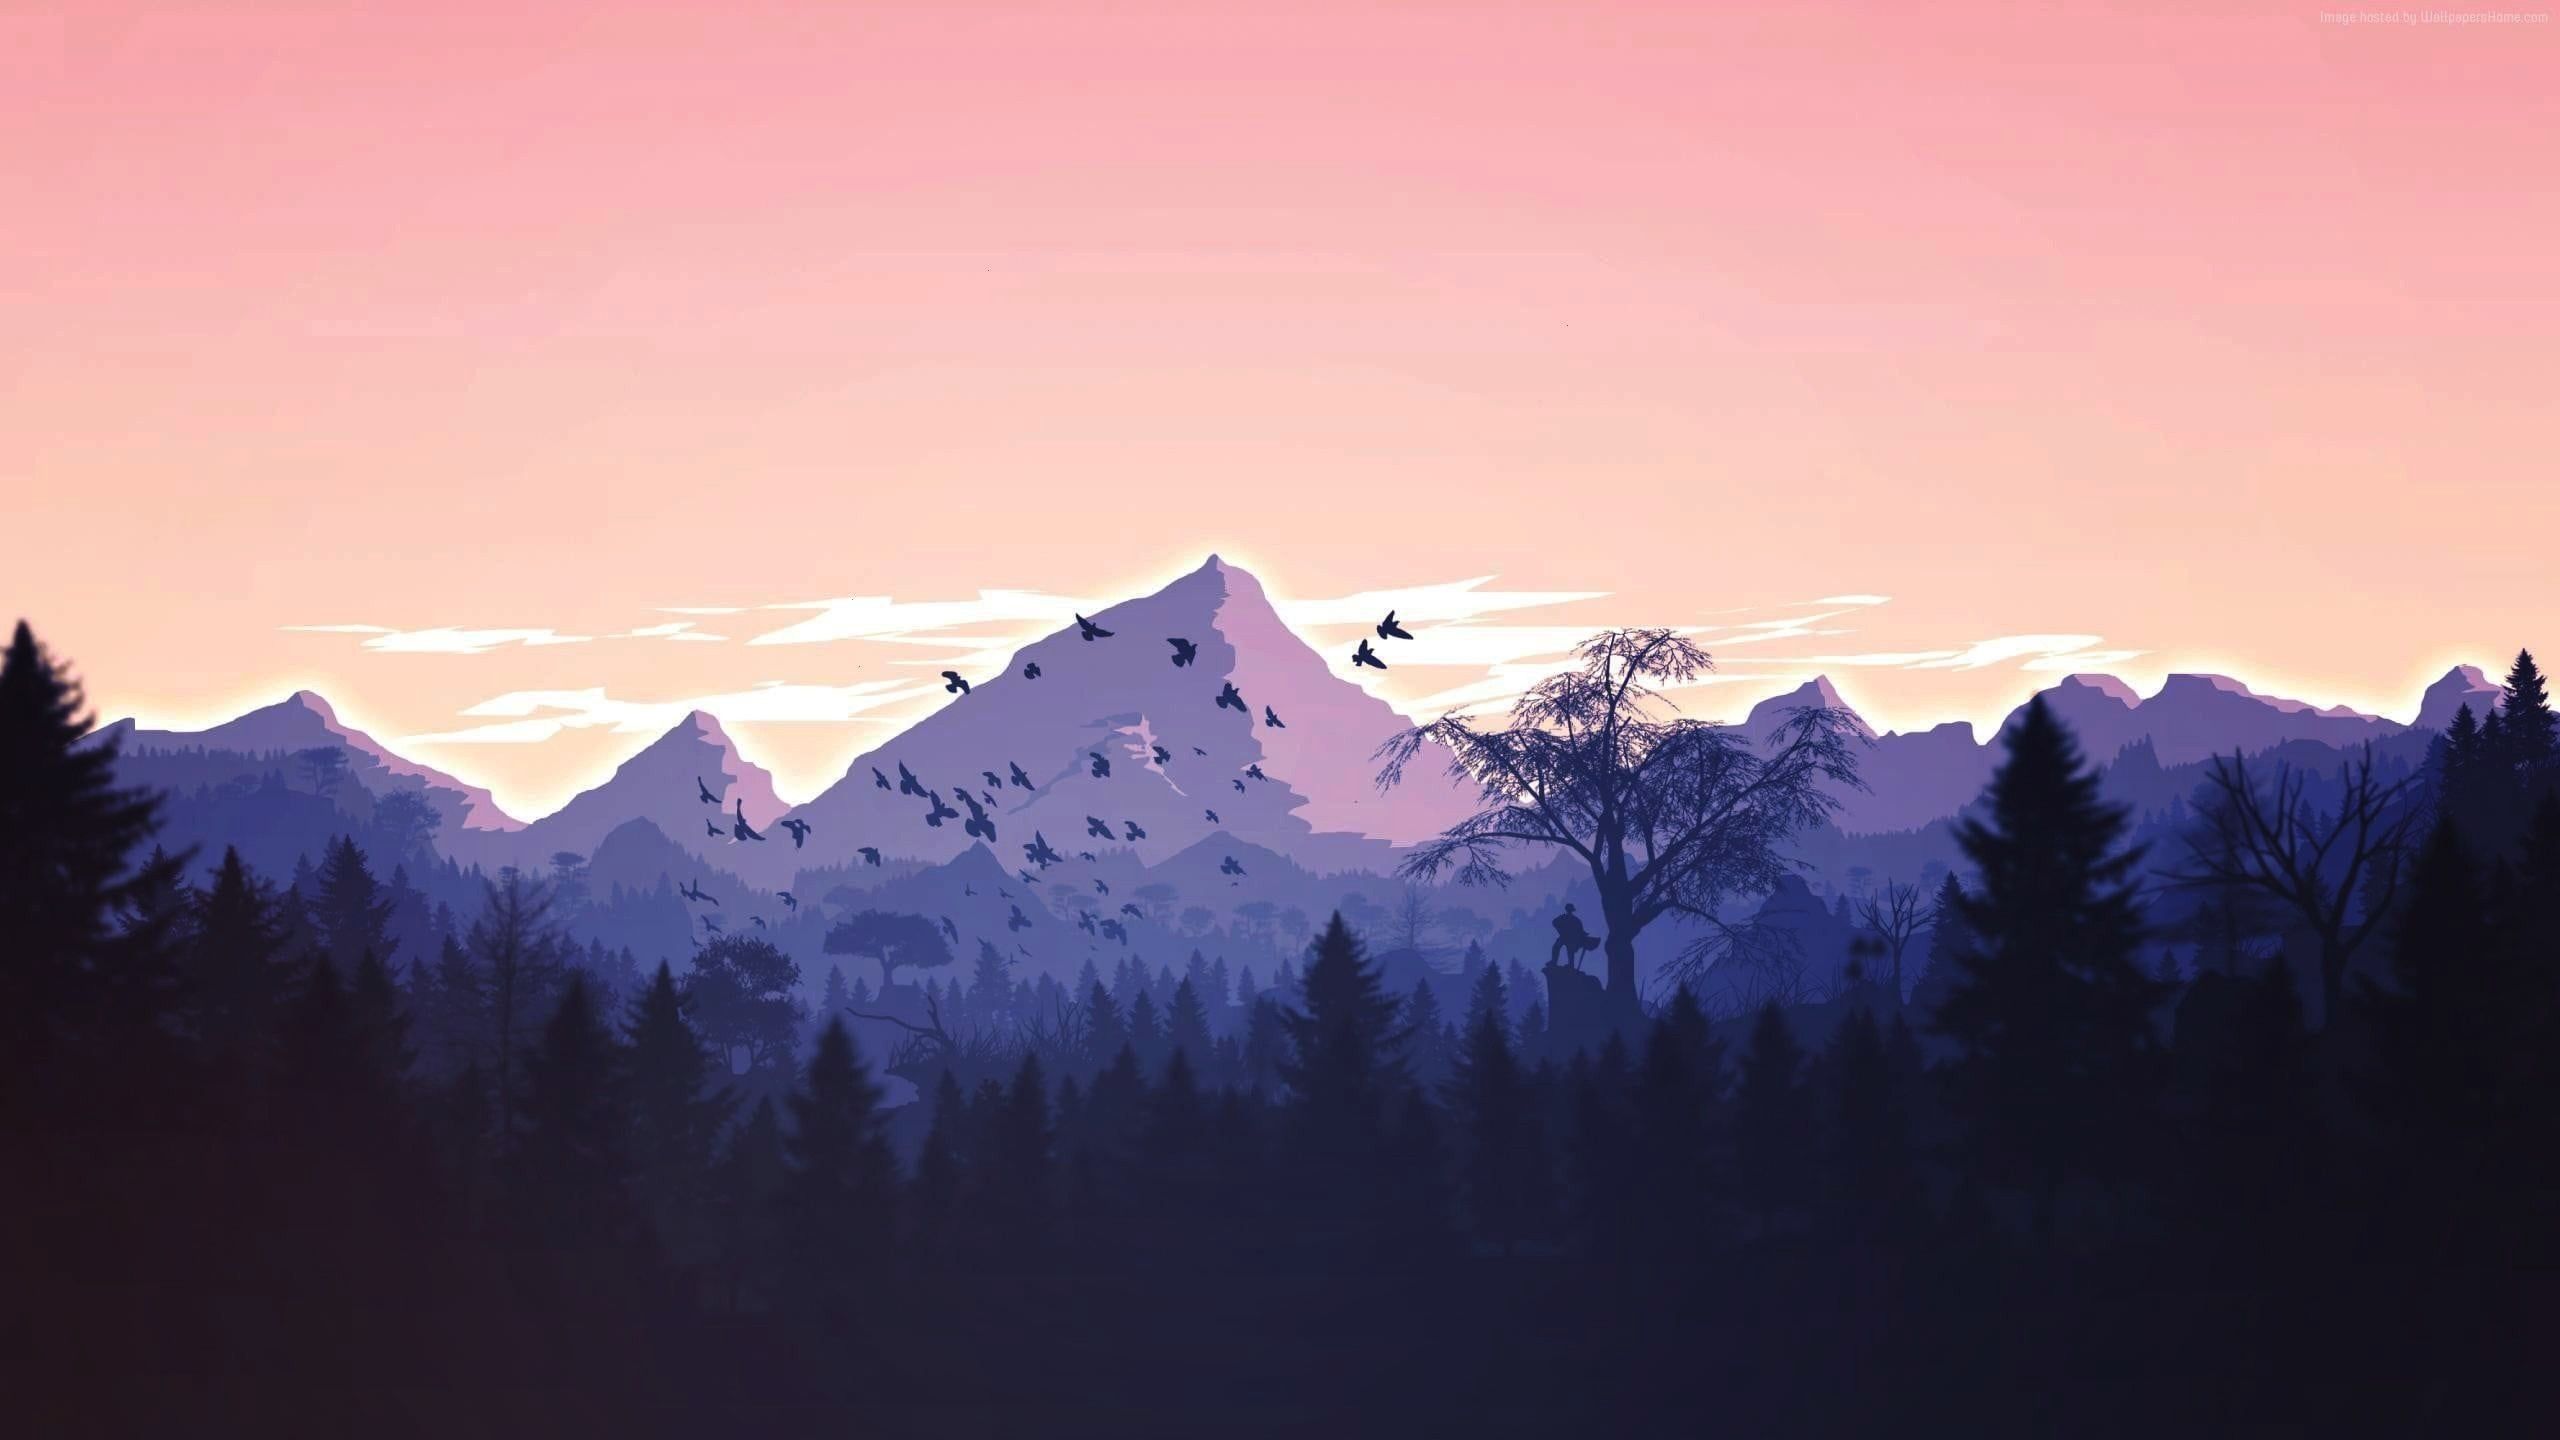 A sunset scene with mountains and trees - Mountain, 2560x1440, landscape